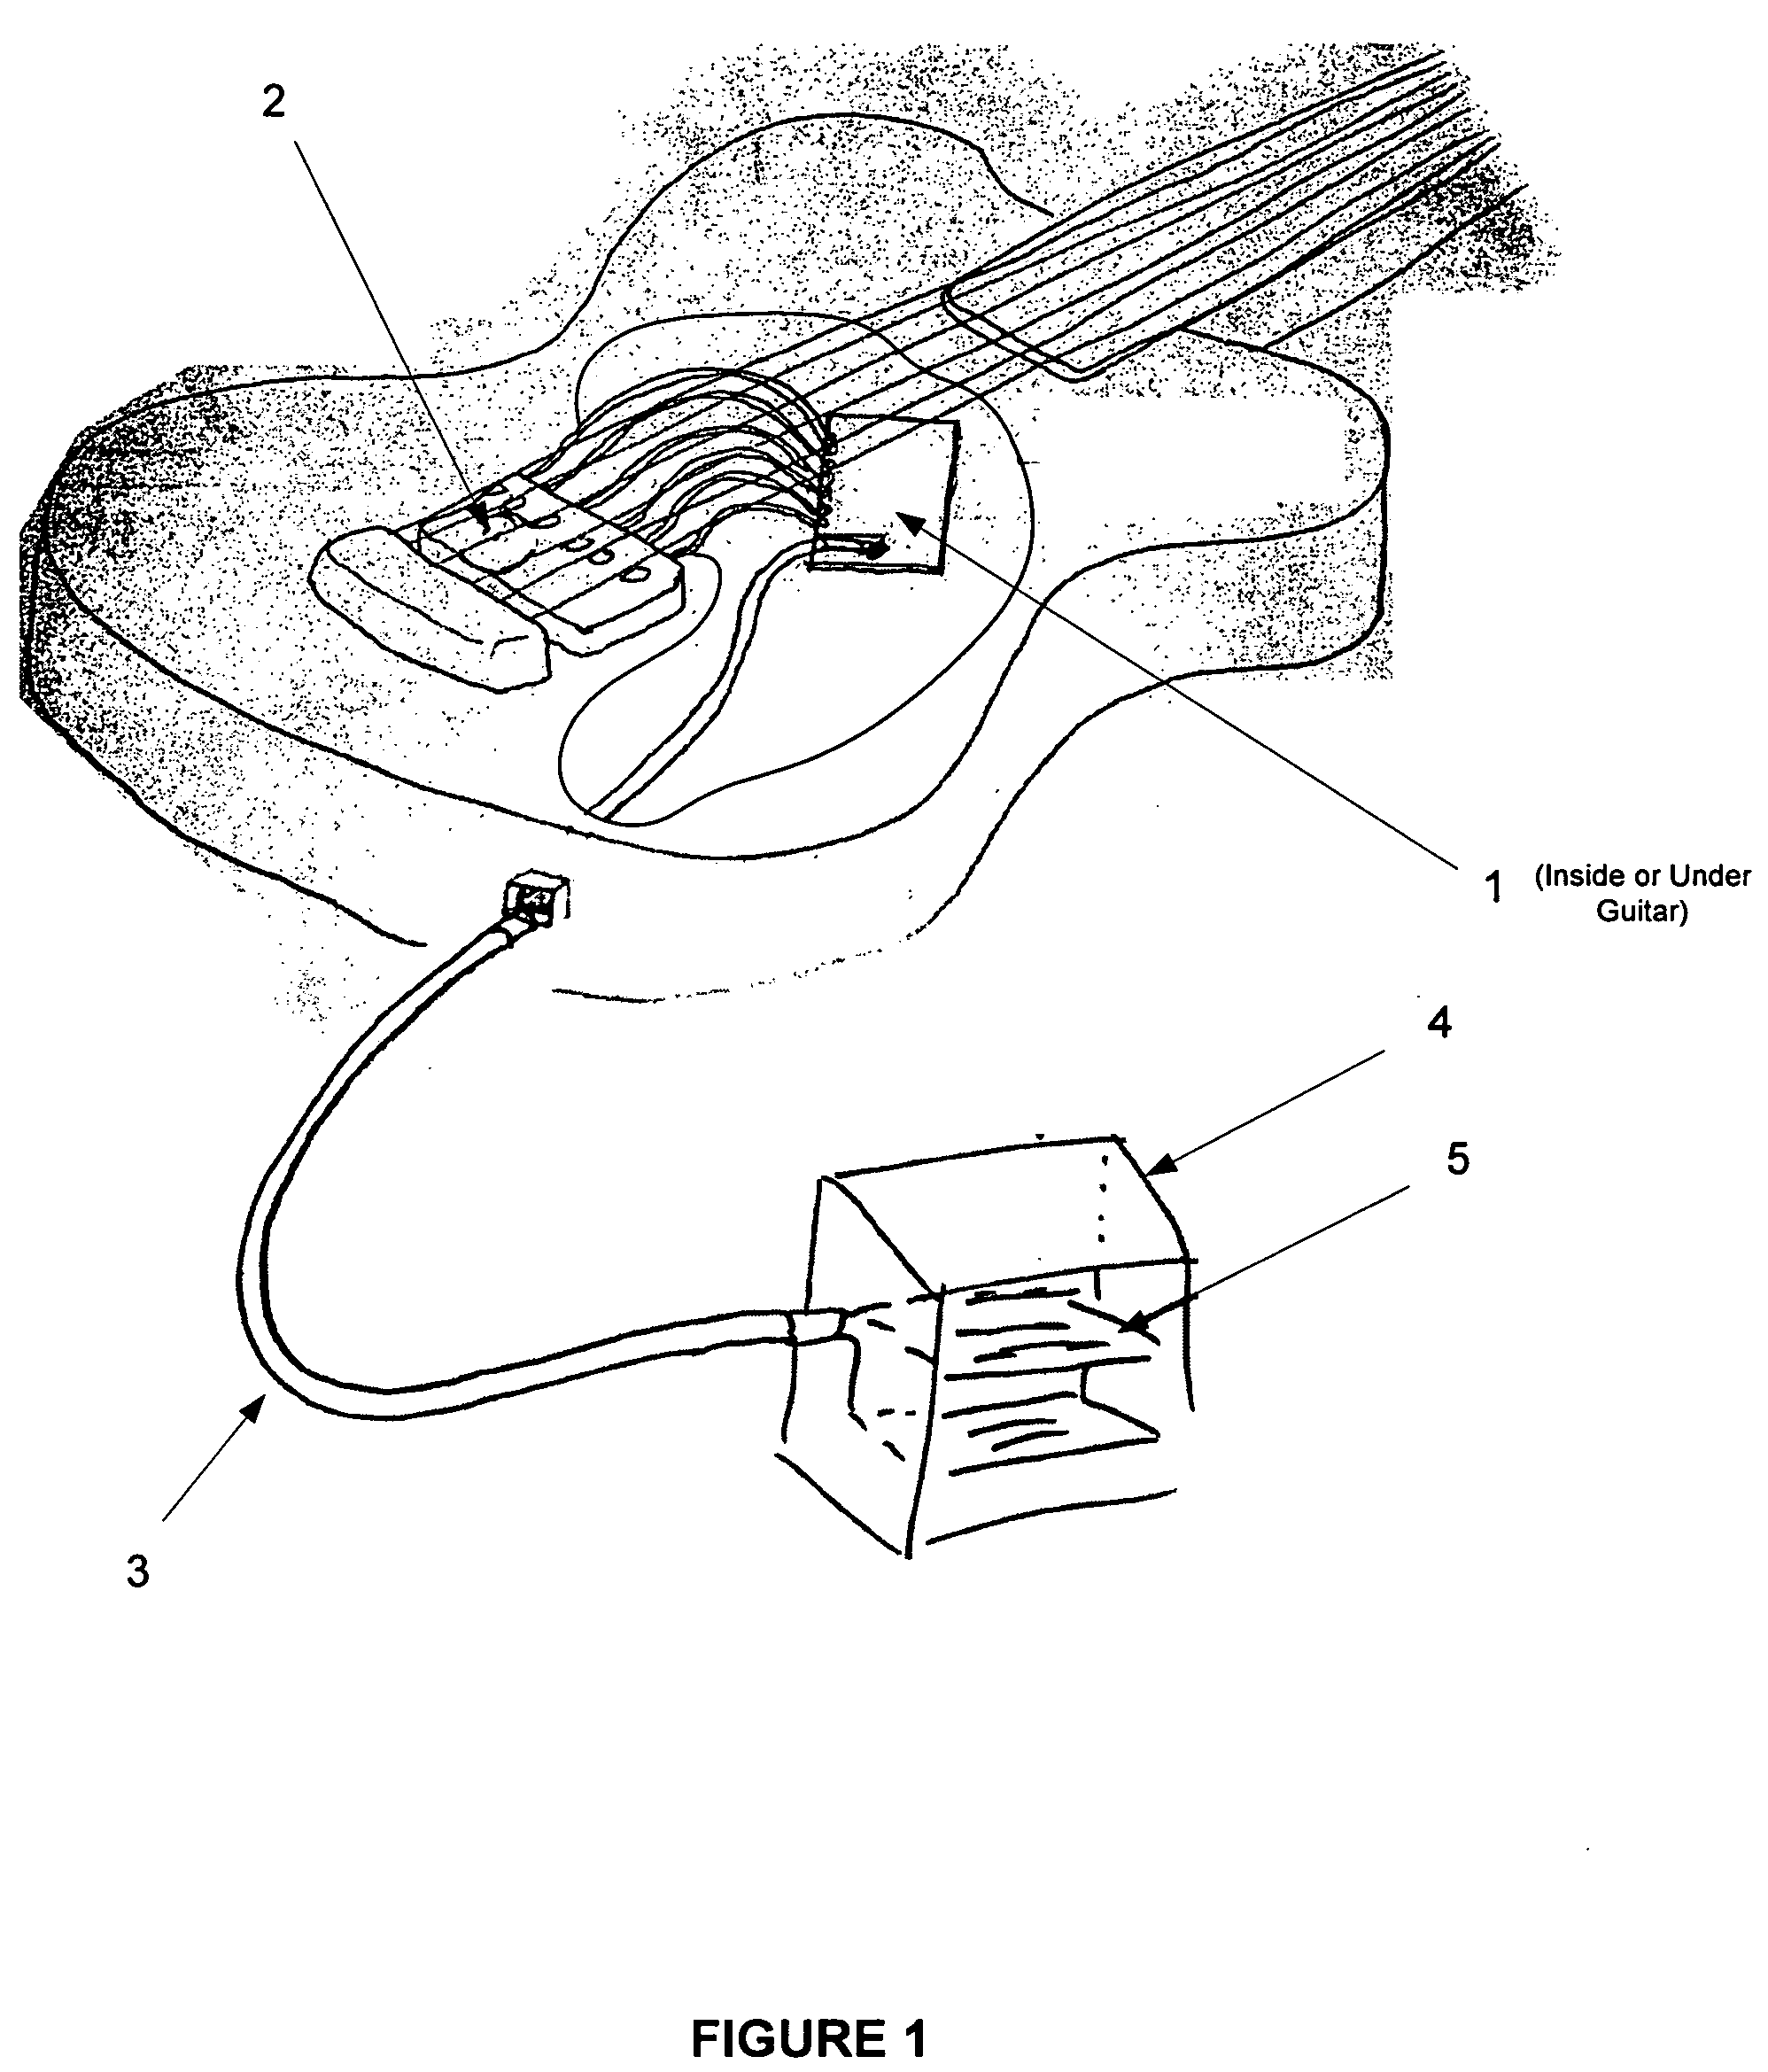 System for digitally transmitting audio data from individual electric guitar strings